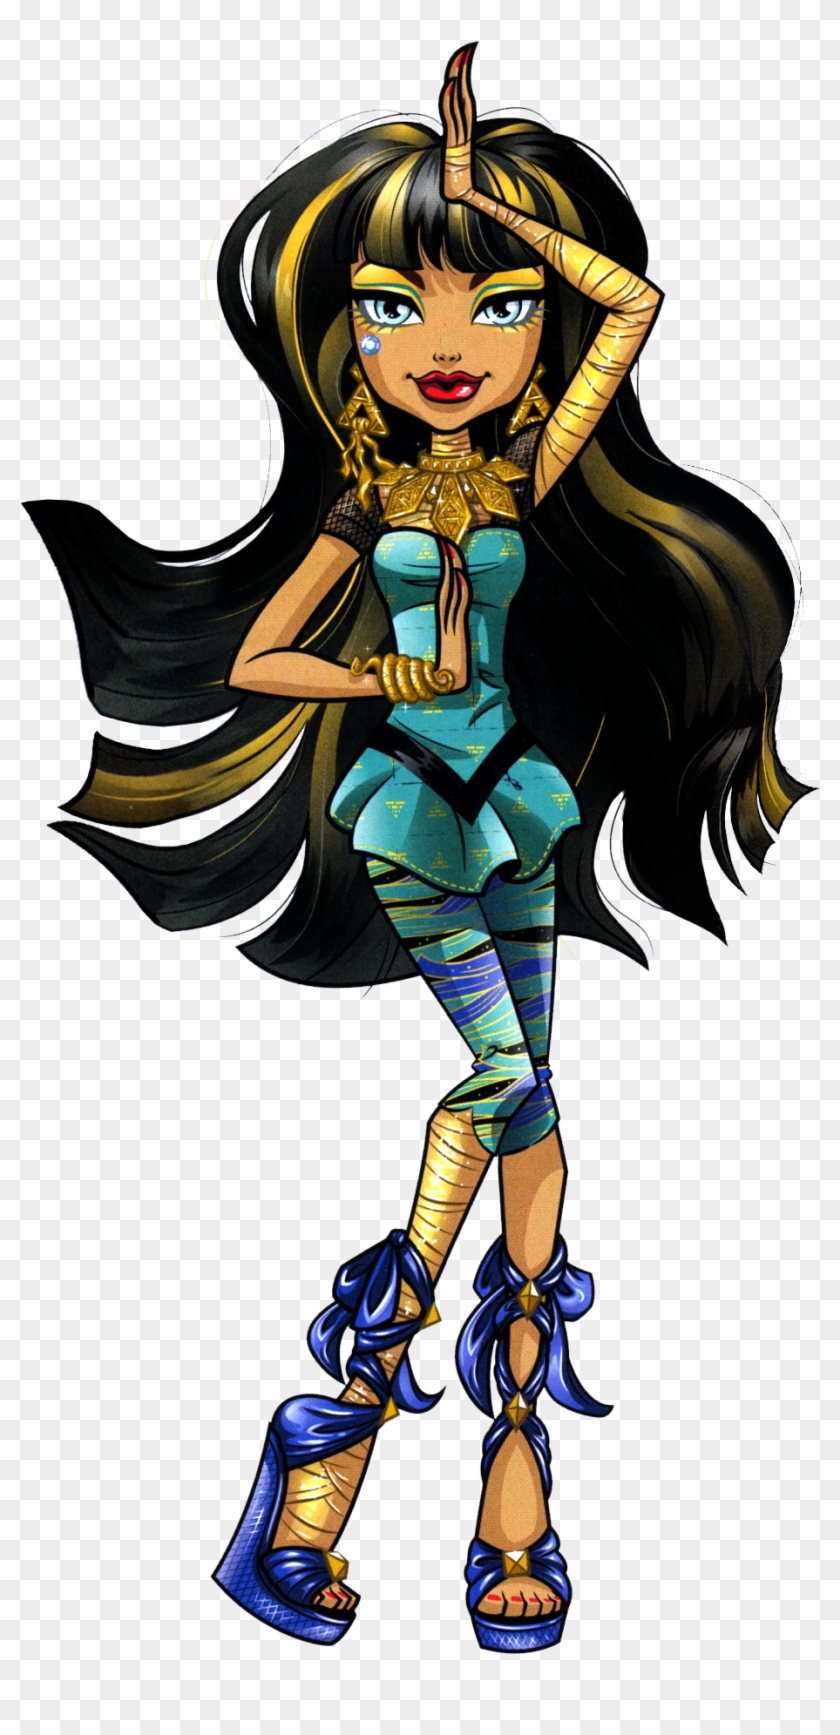 Cleo De Nile Is The Daughter Of The Mummy - Monster High Dead Tired Dolls Cleo Clipart #3940428